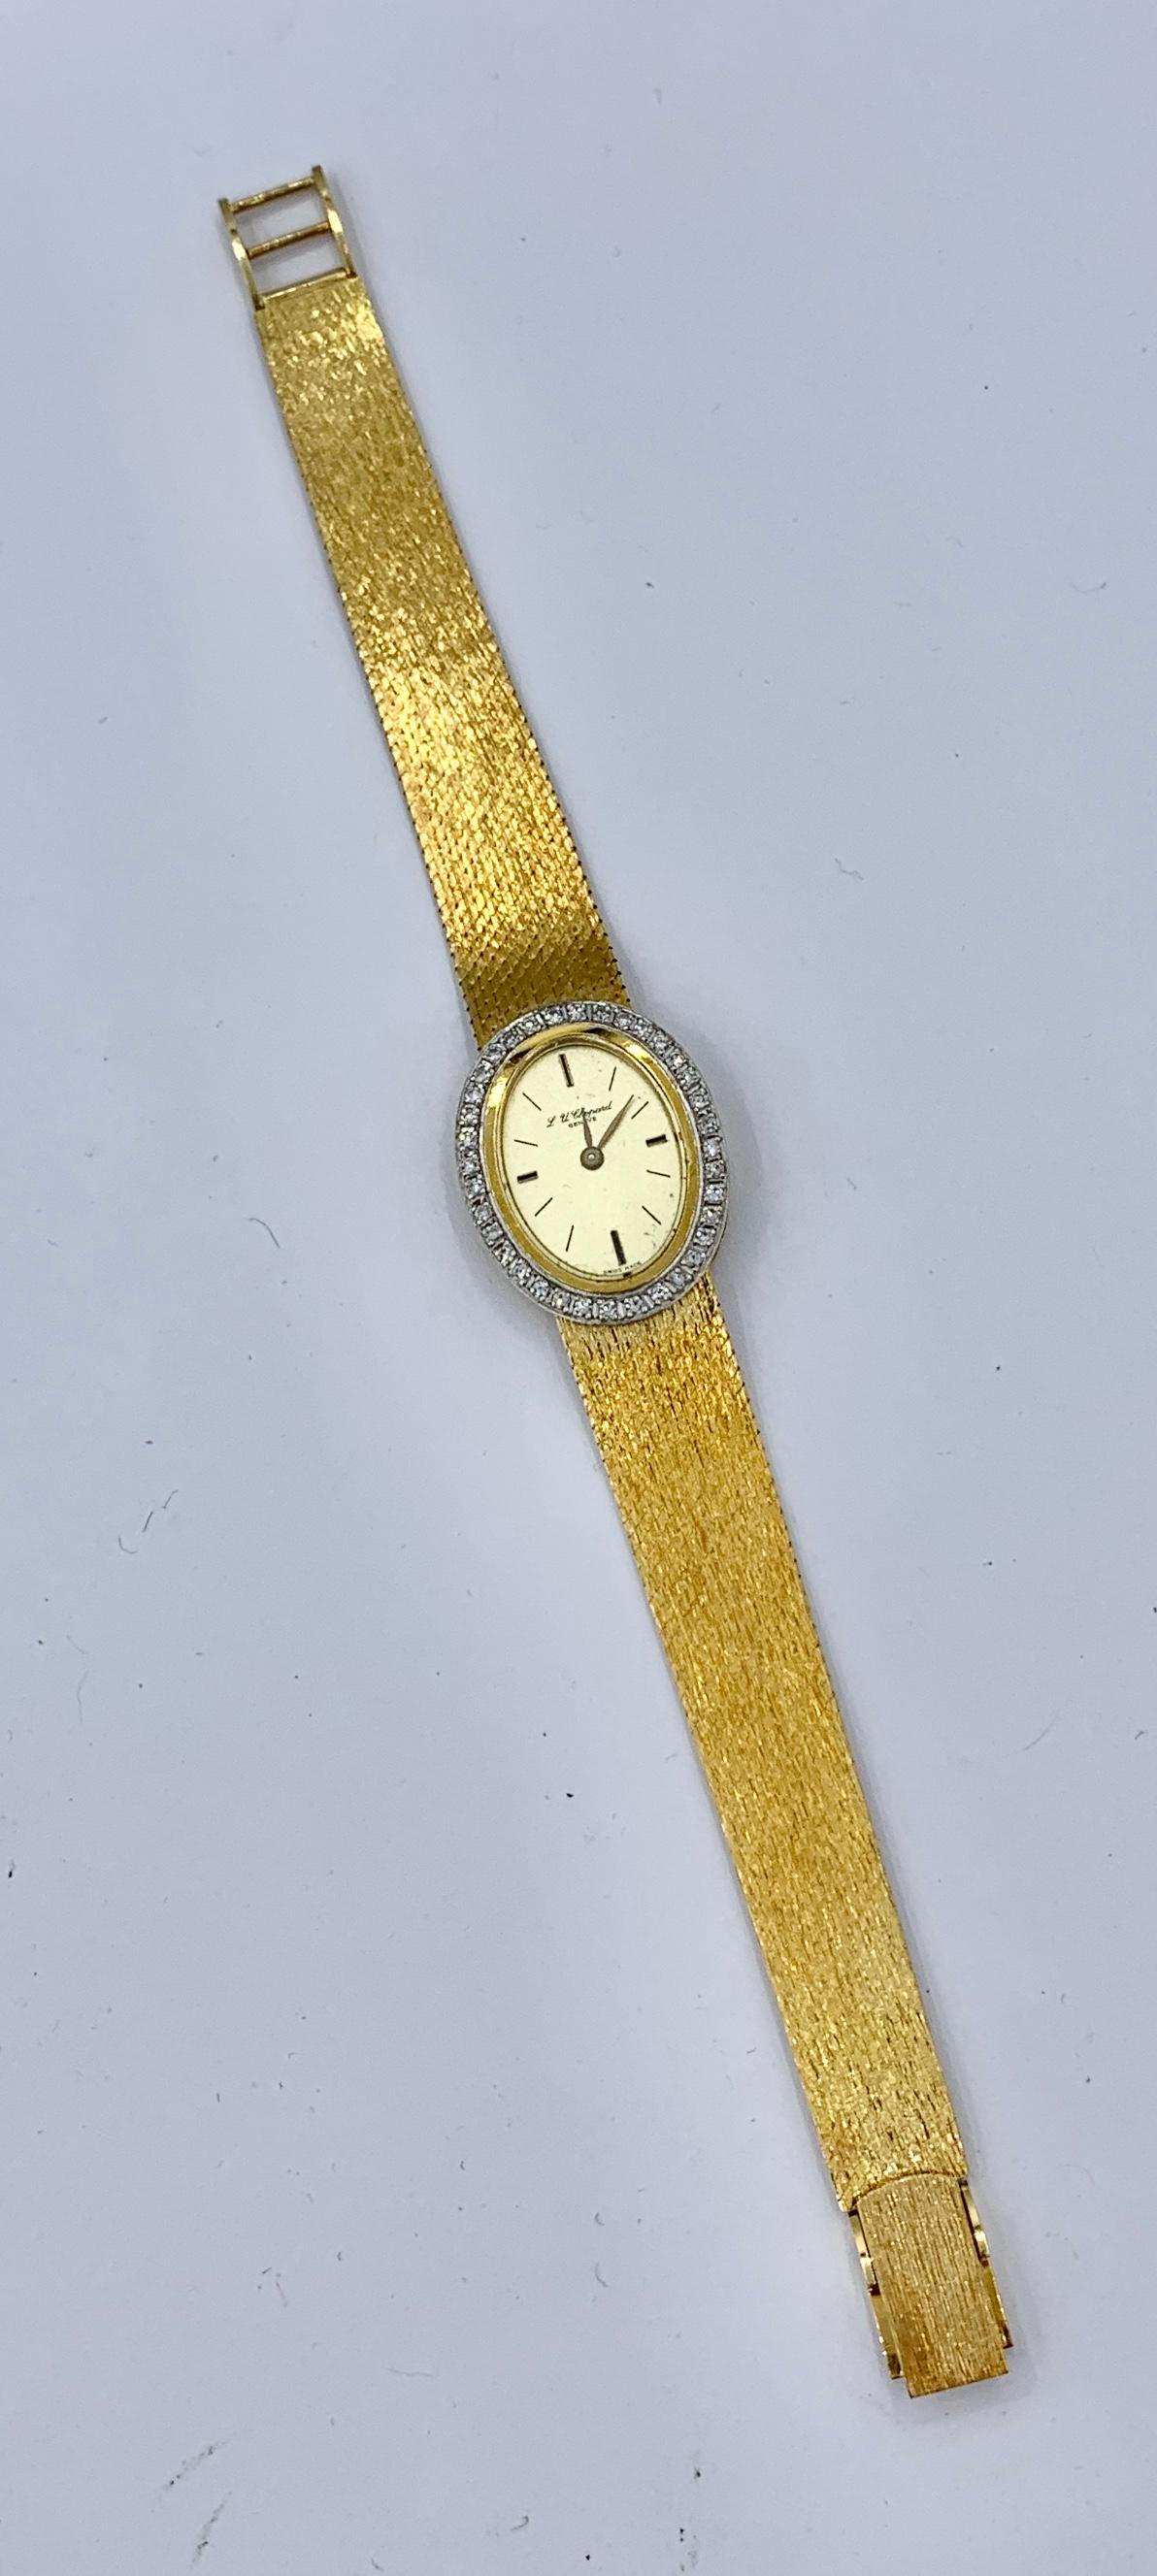 This is a gorgeous Chopard Ladies Diamond Wristwatch in 18 Karat Yellow and White Gold Made in Switzerland.  The stunning and elegant Chopard watch has a diamond surround.  The diamonds are set in 18 Karat White Gold.  The remainder of the watch is